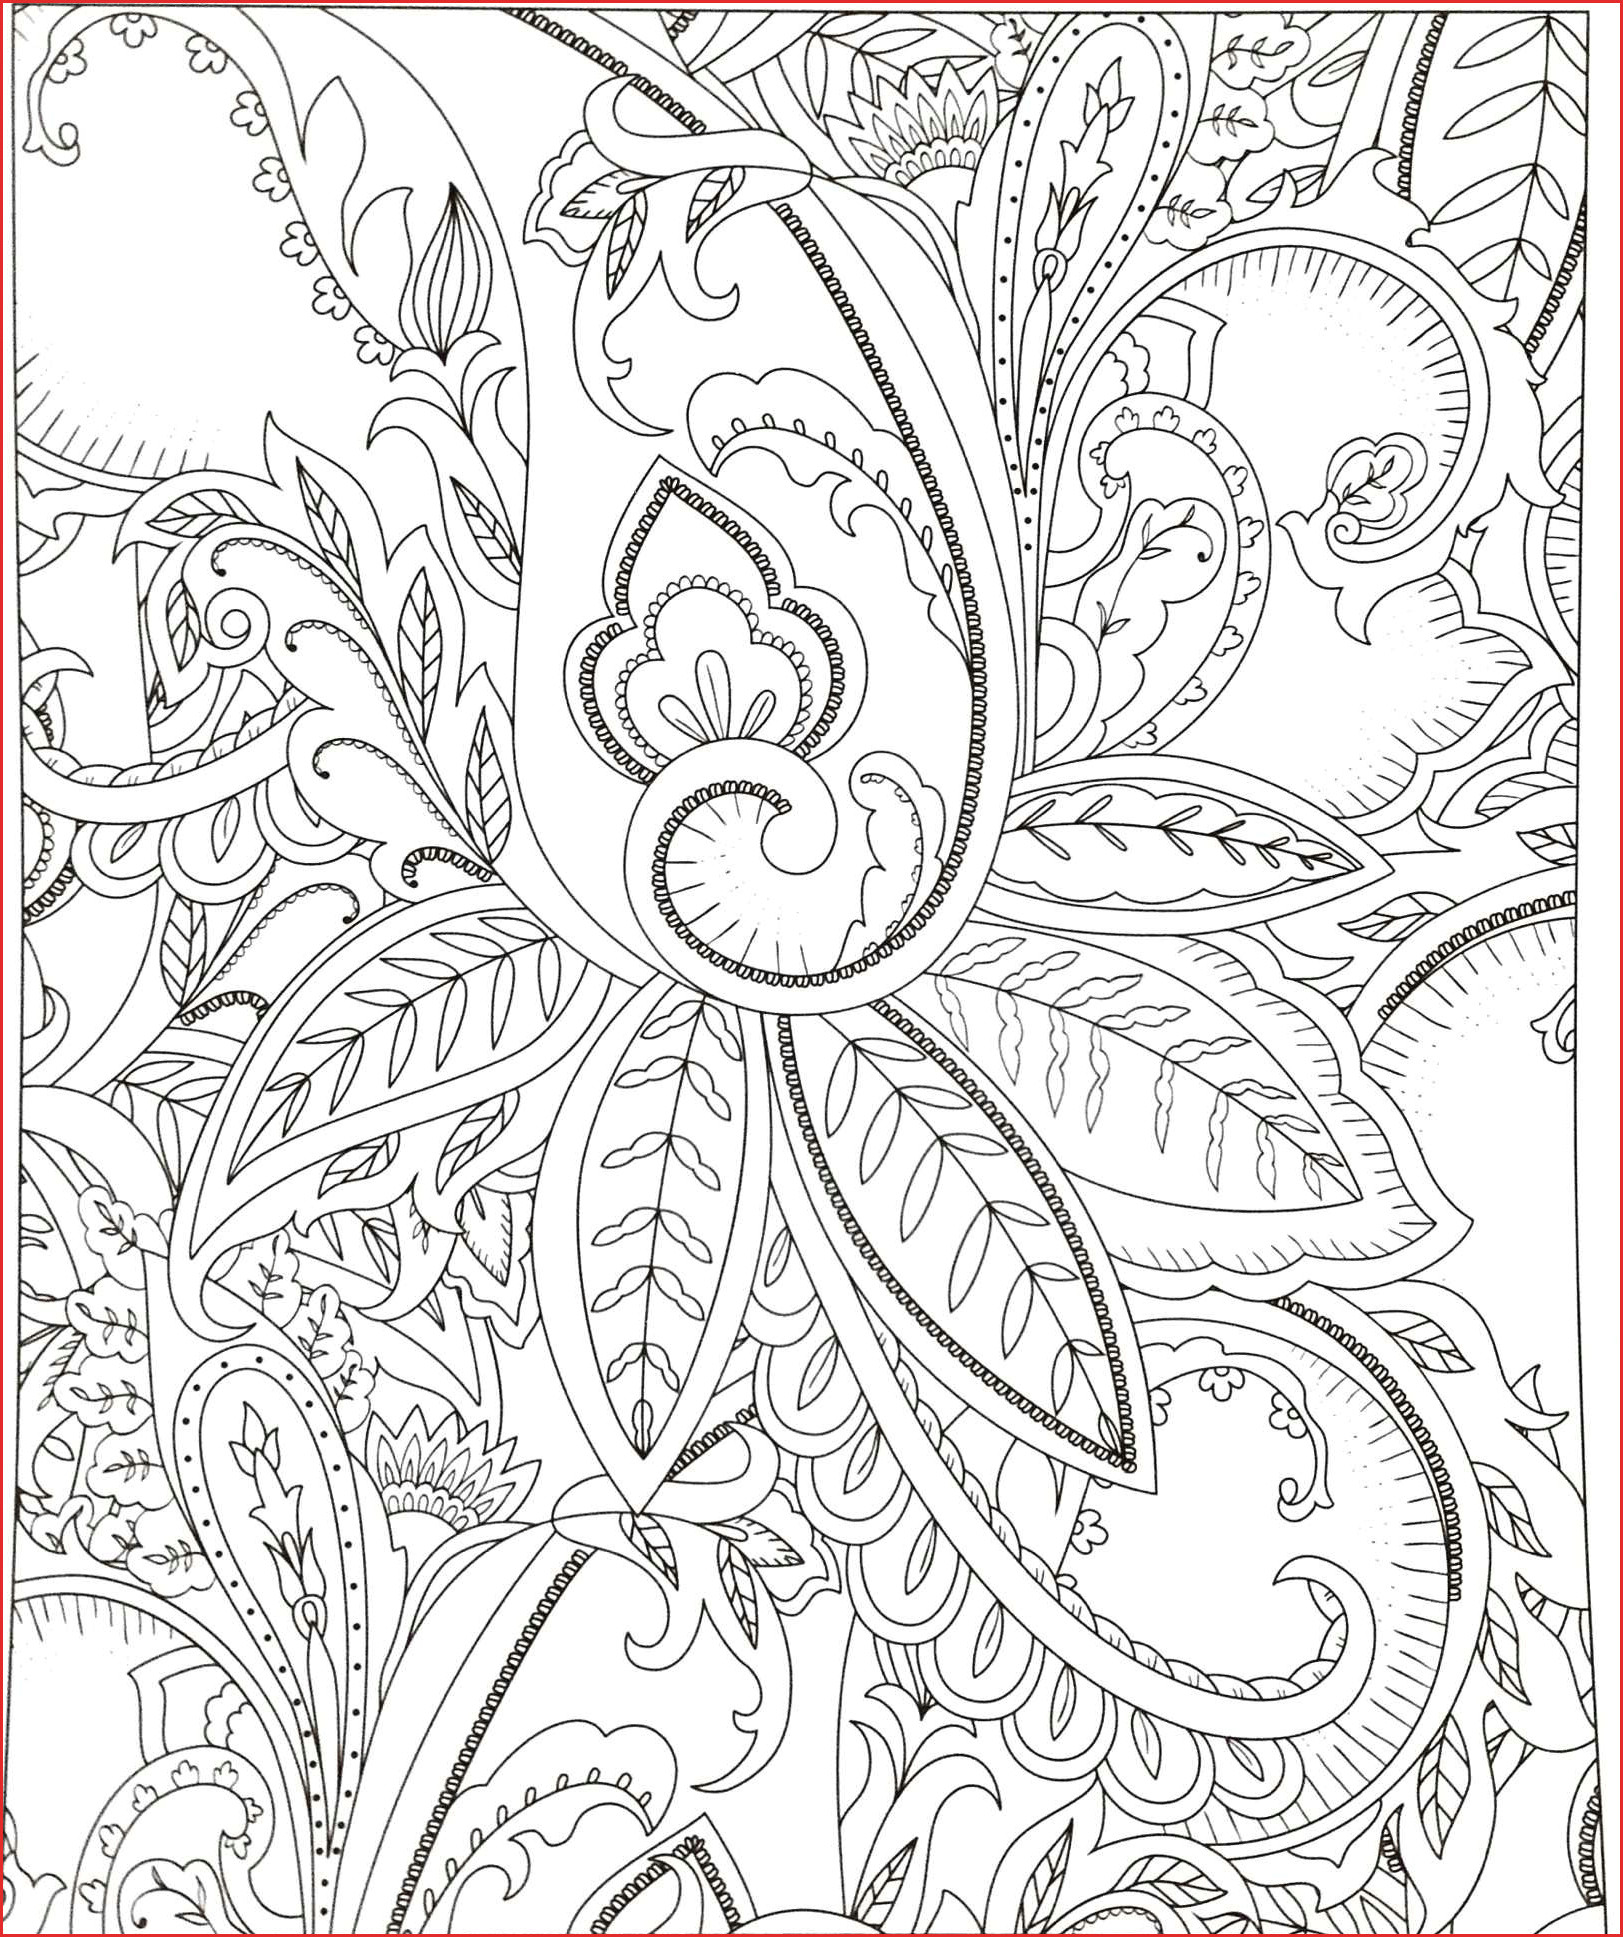 Easy Instruments to Draw 22 Cool Gallery Of Realistic Animal Coloring Page Crafted Here